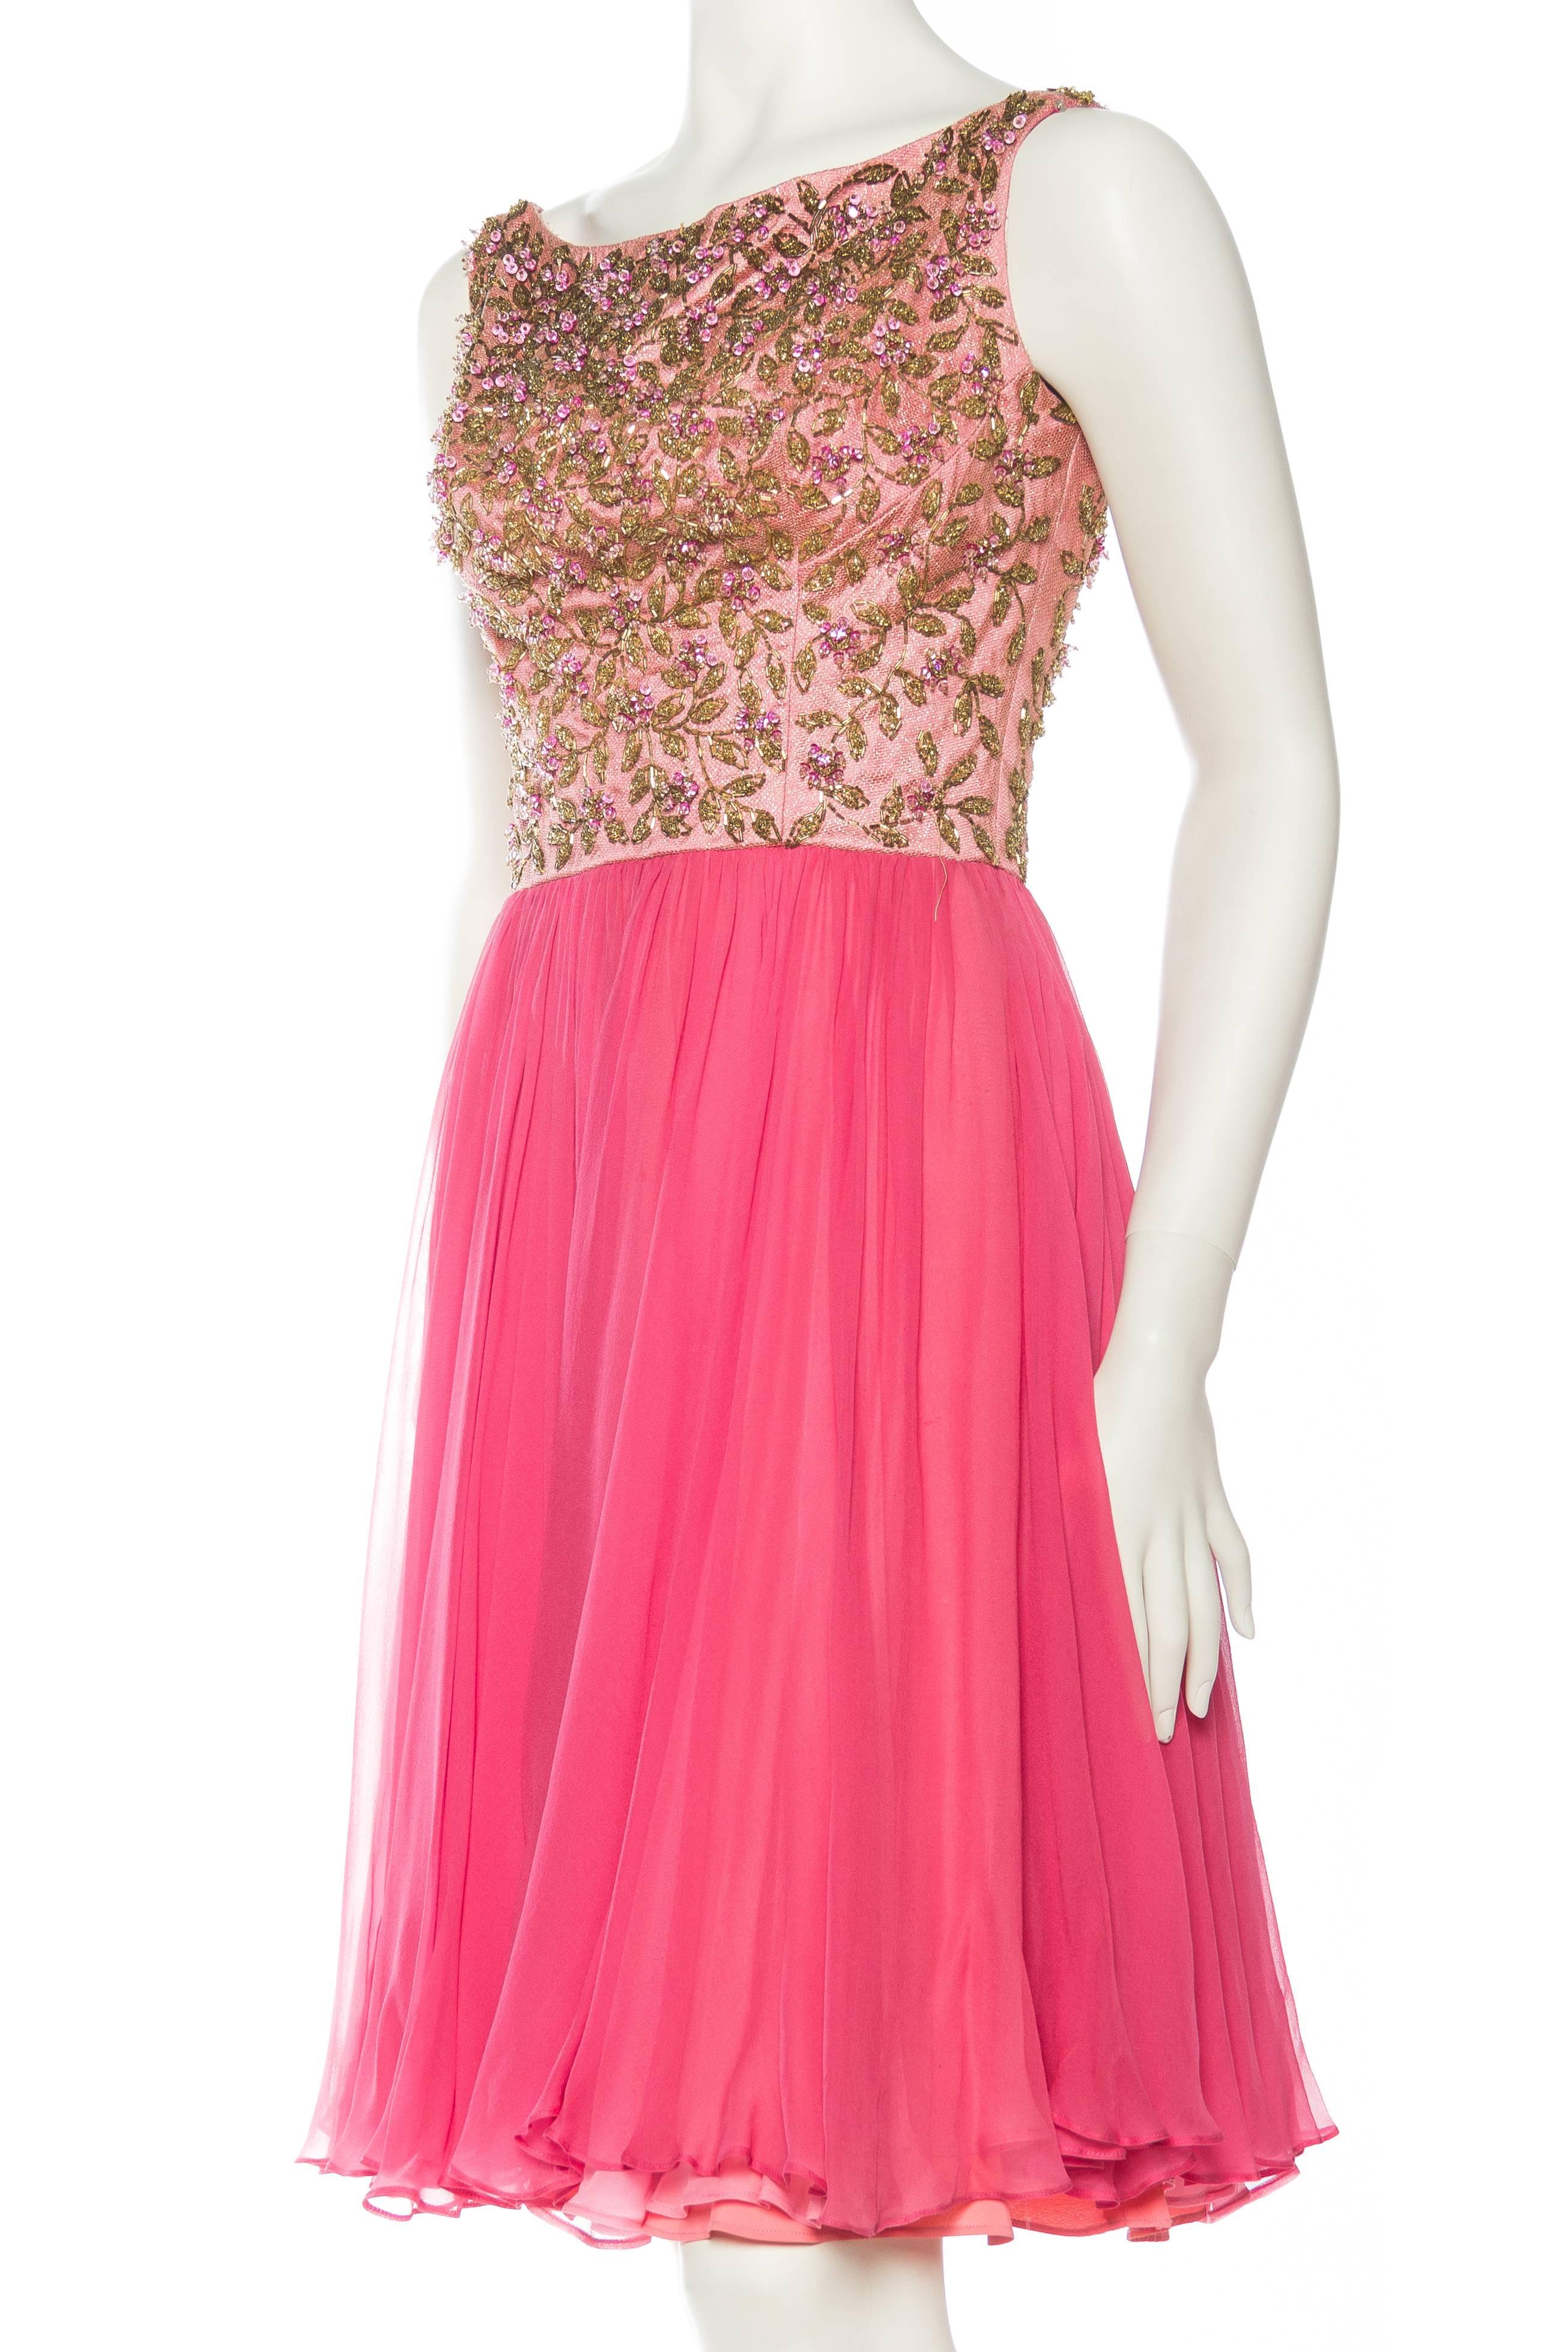 1960S Pink & Gold Silk Chiffon Beaded Swing Skirt Party Cocktail Dress In Excellent Condition For Sale In New York, NY